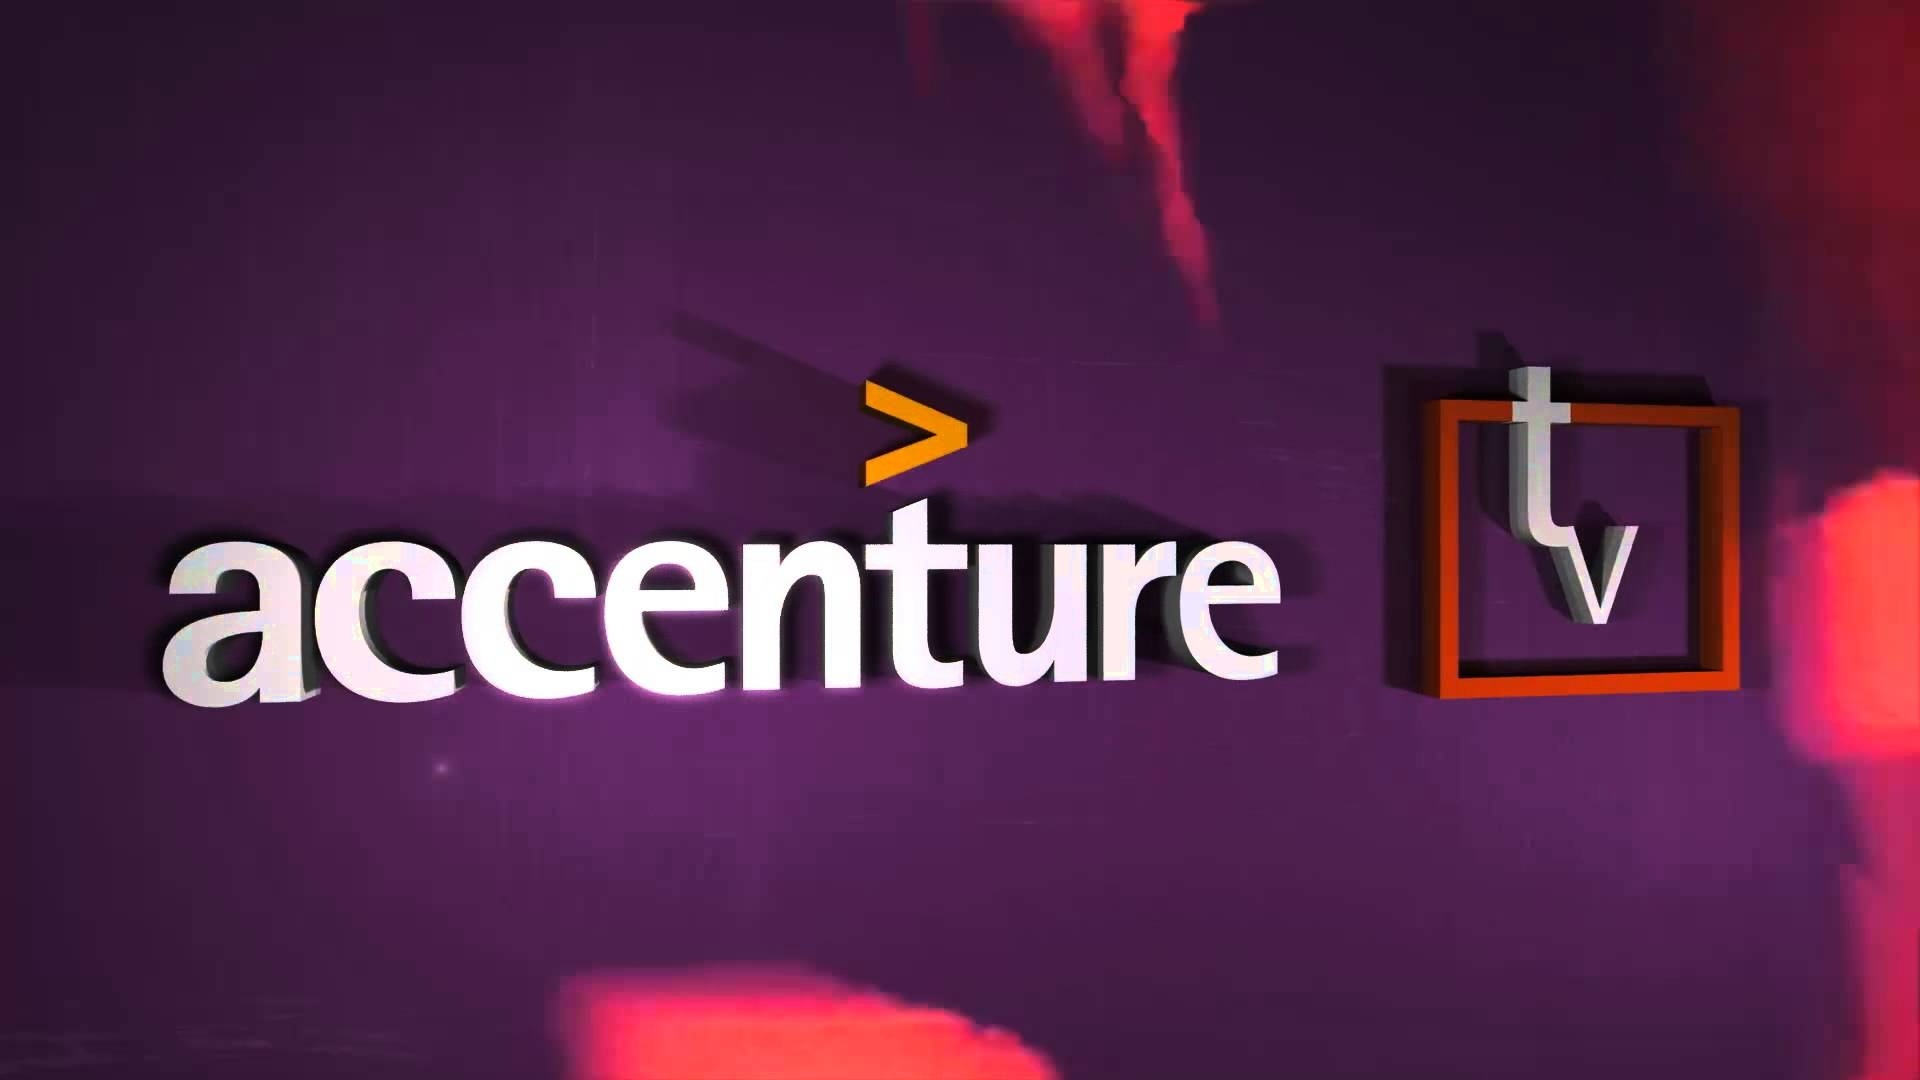 Accenture Wallpaper - Accenture Wallpaper Hd , HD Wallpaper & Backgrounds